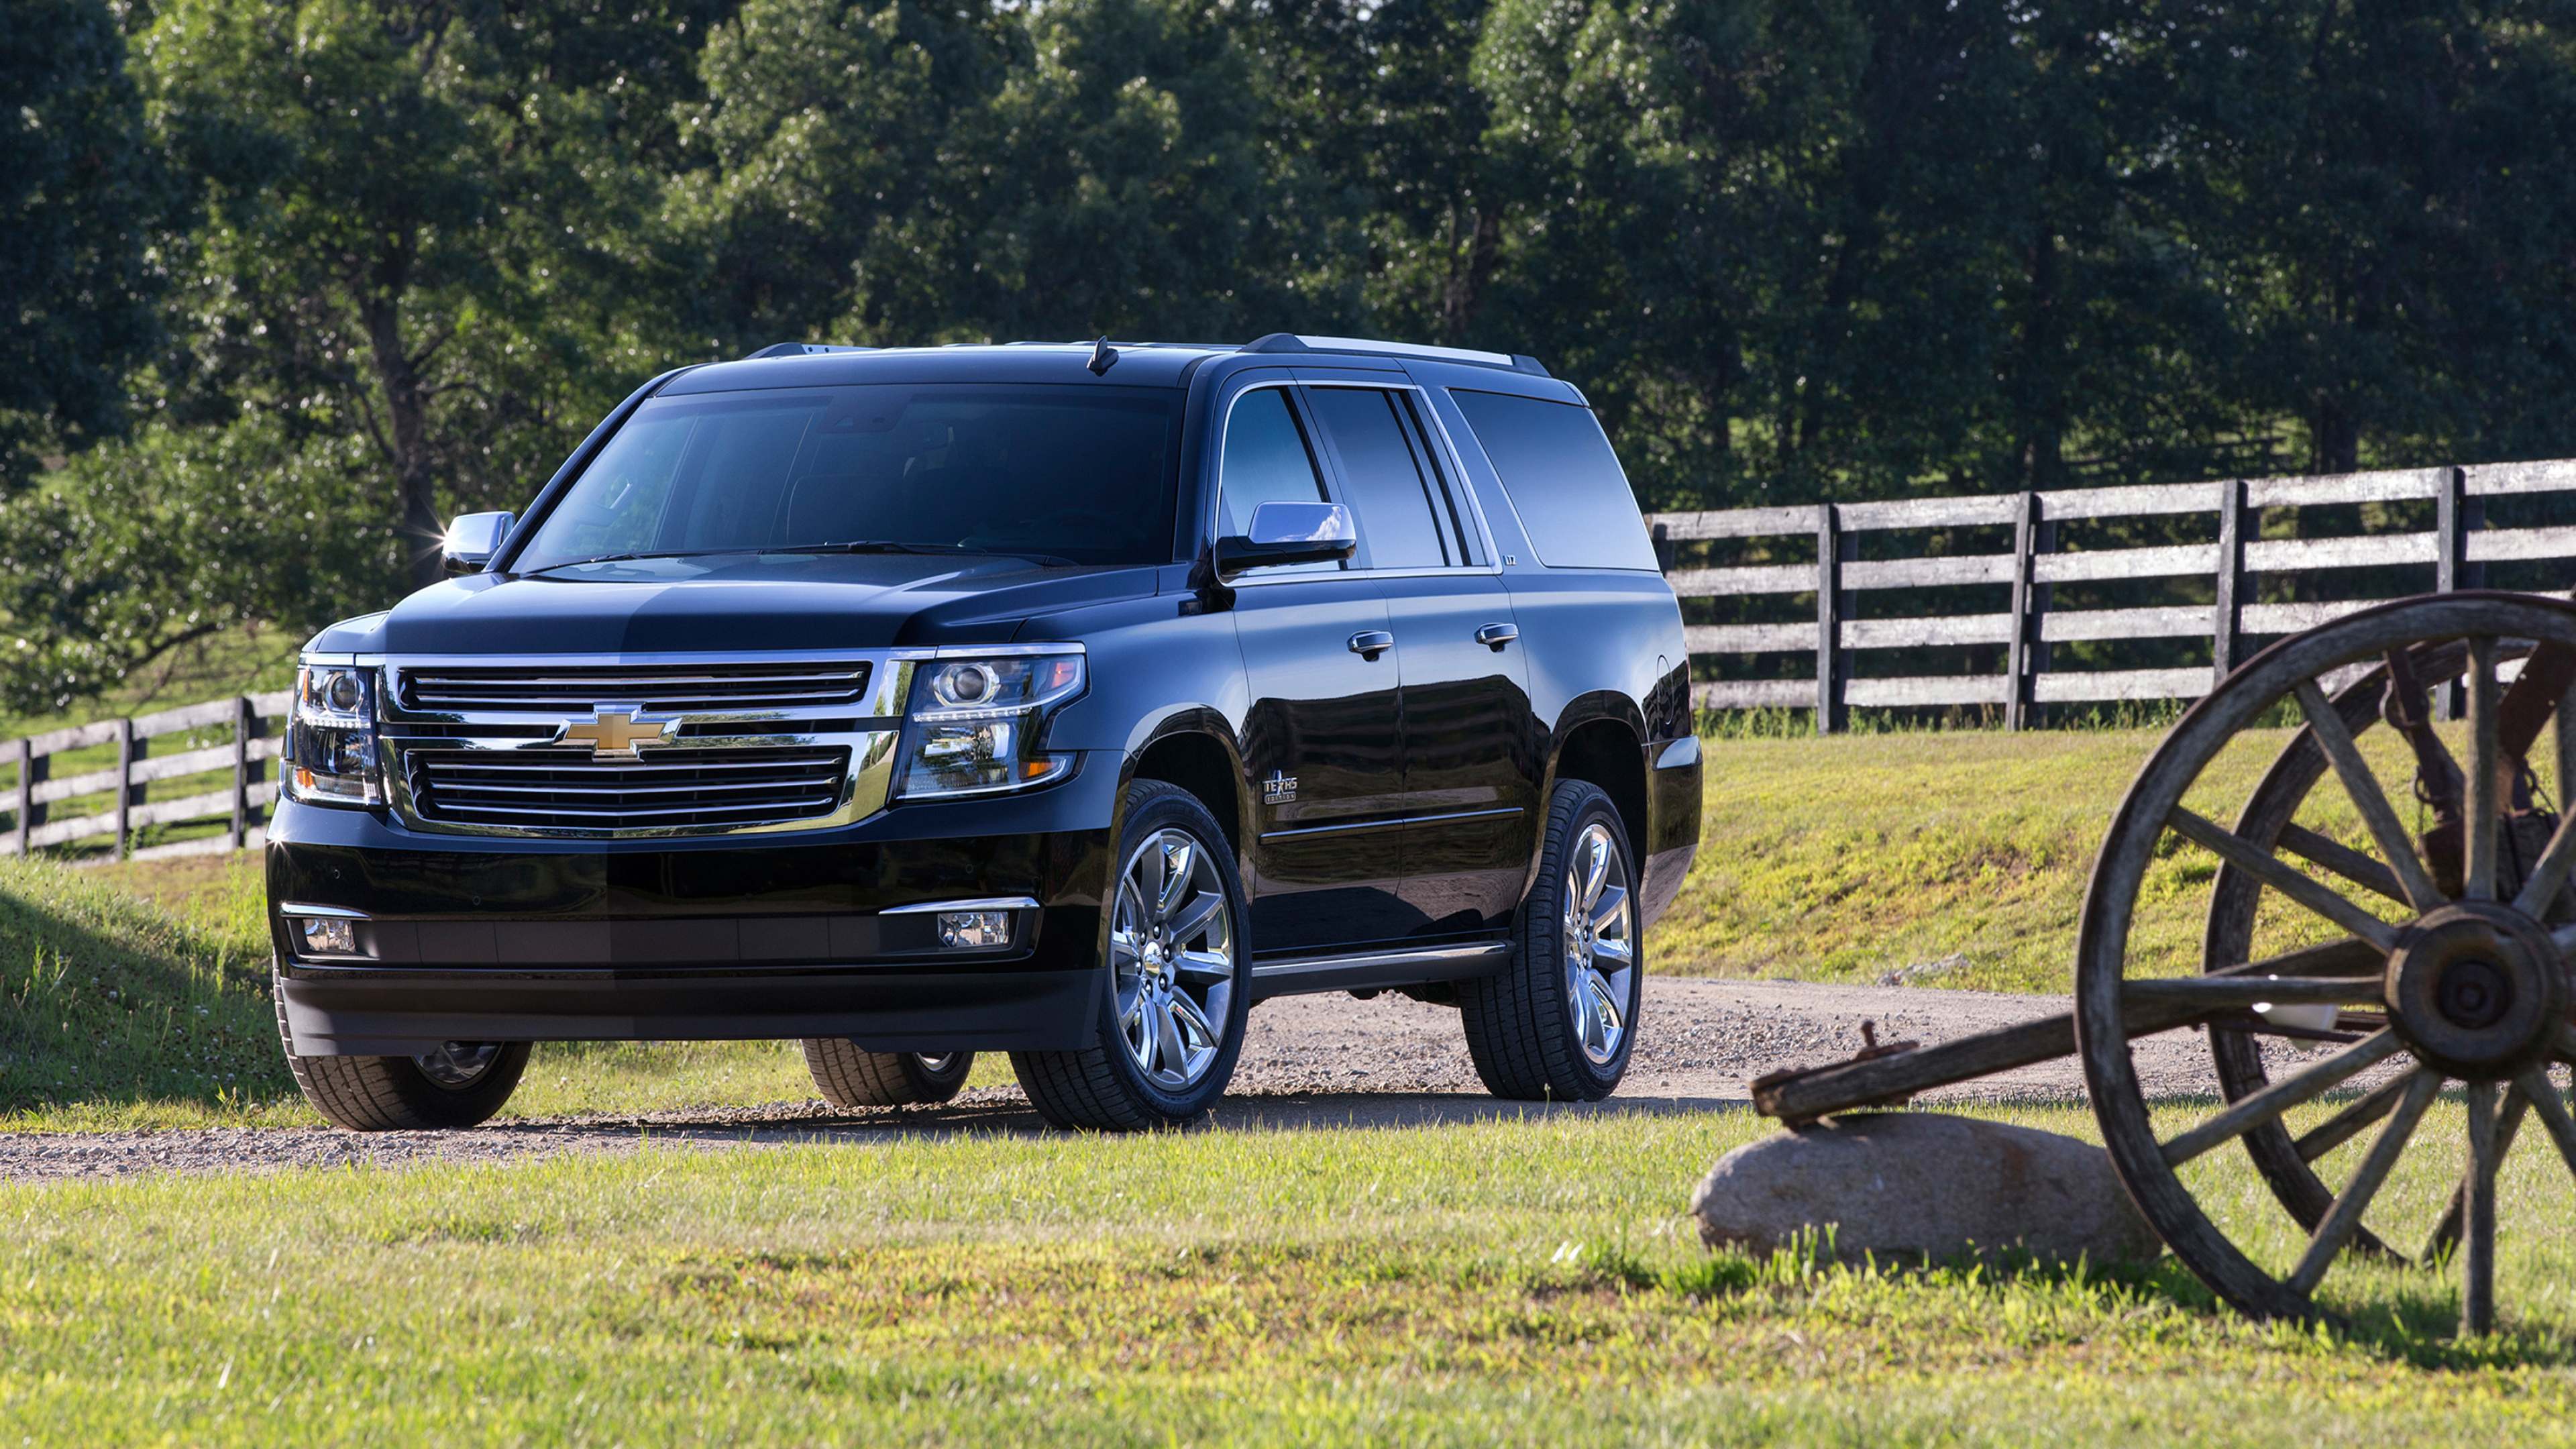 Chevrolet Suburban, Rugged and dependable, Enhanced safety features, Smooth ride, 3840x2160 4K Desktop